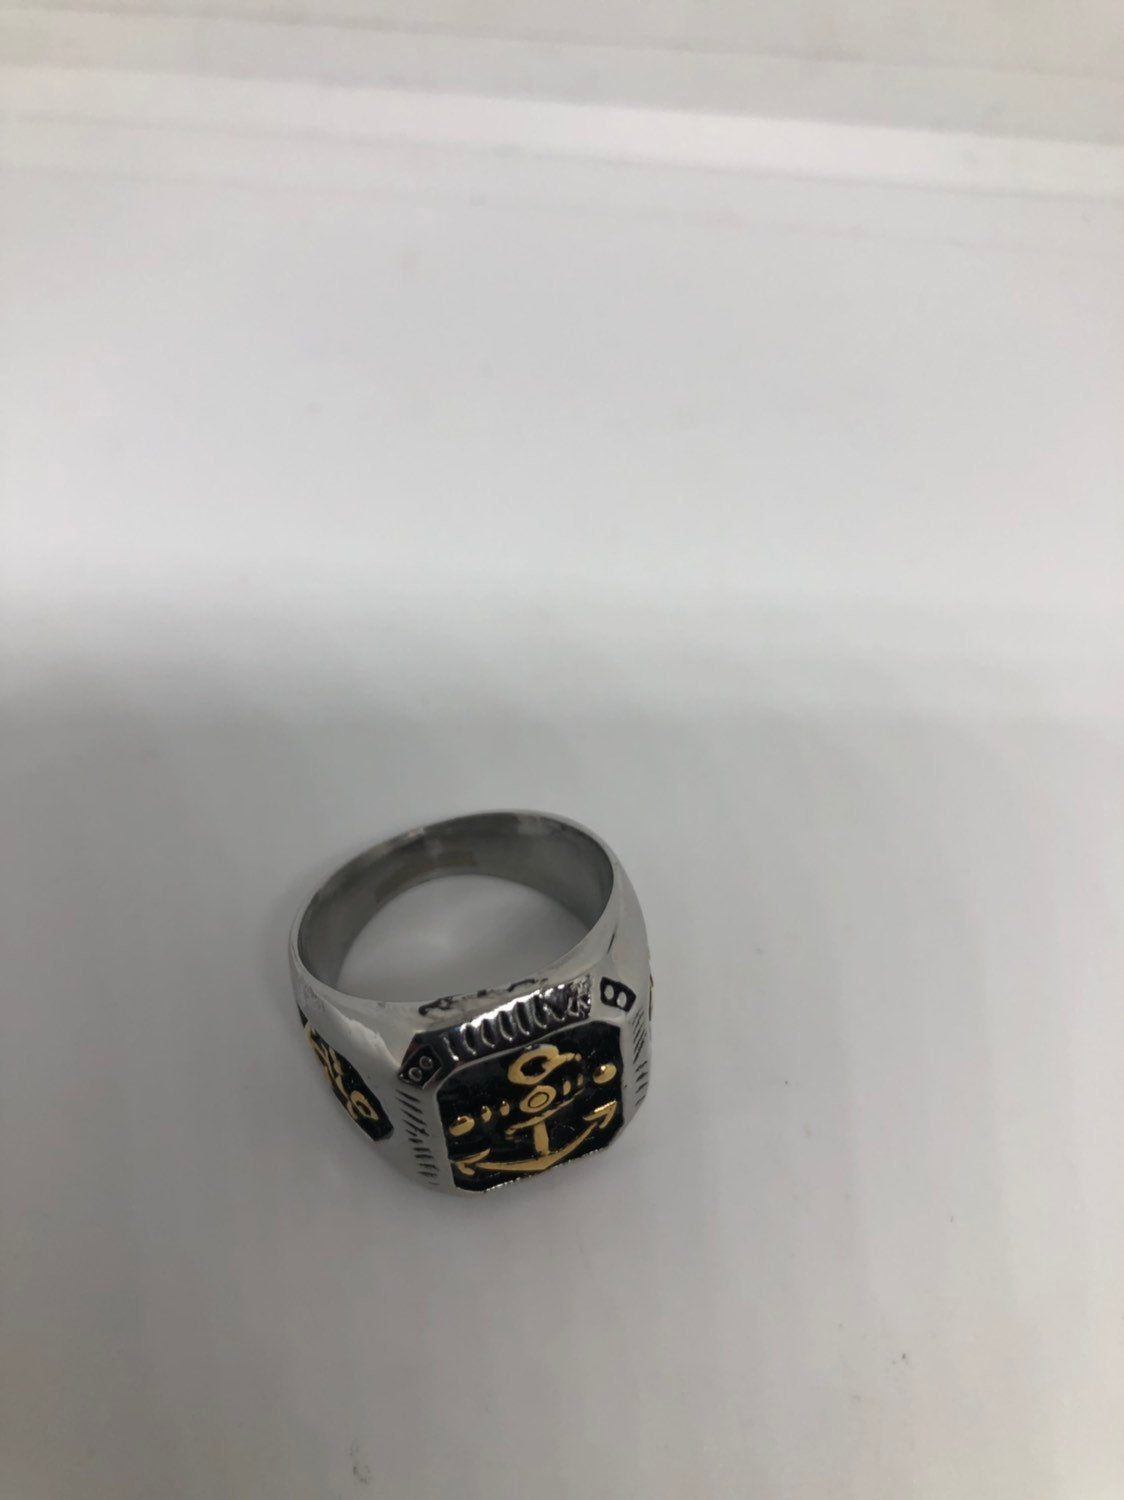 Vintage Gothic Golden Stainless Steel Navy Anchor Mens Ring